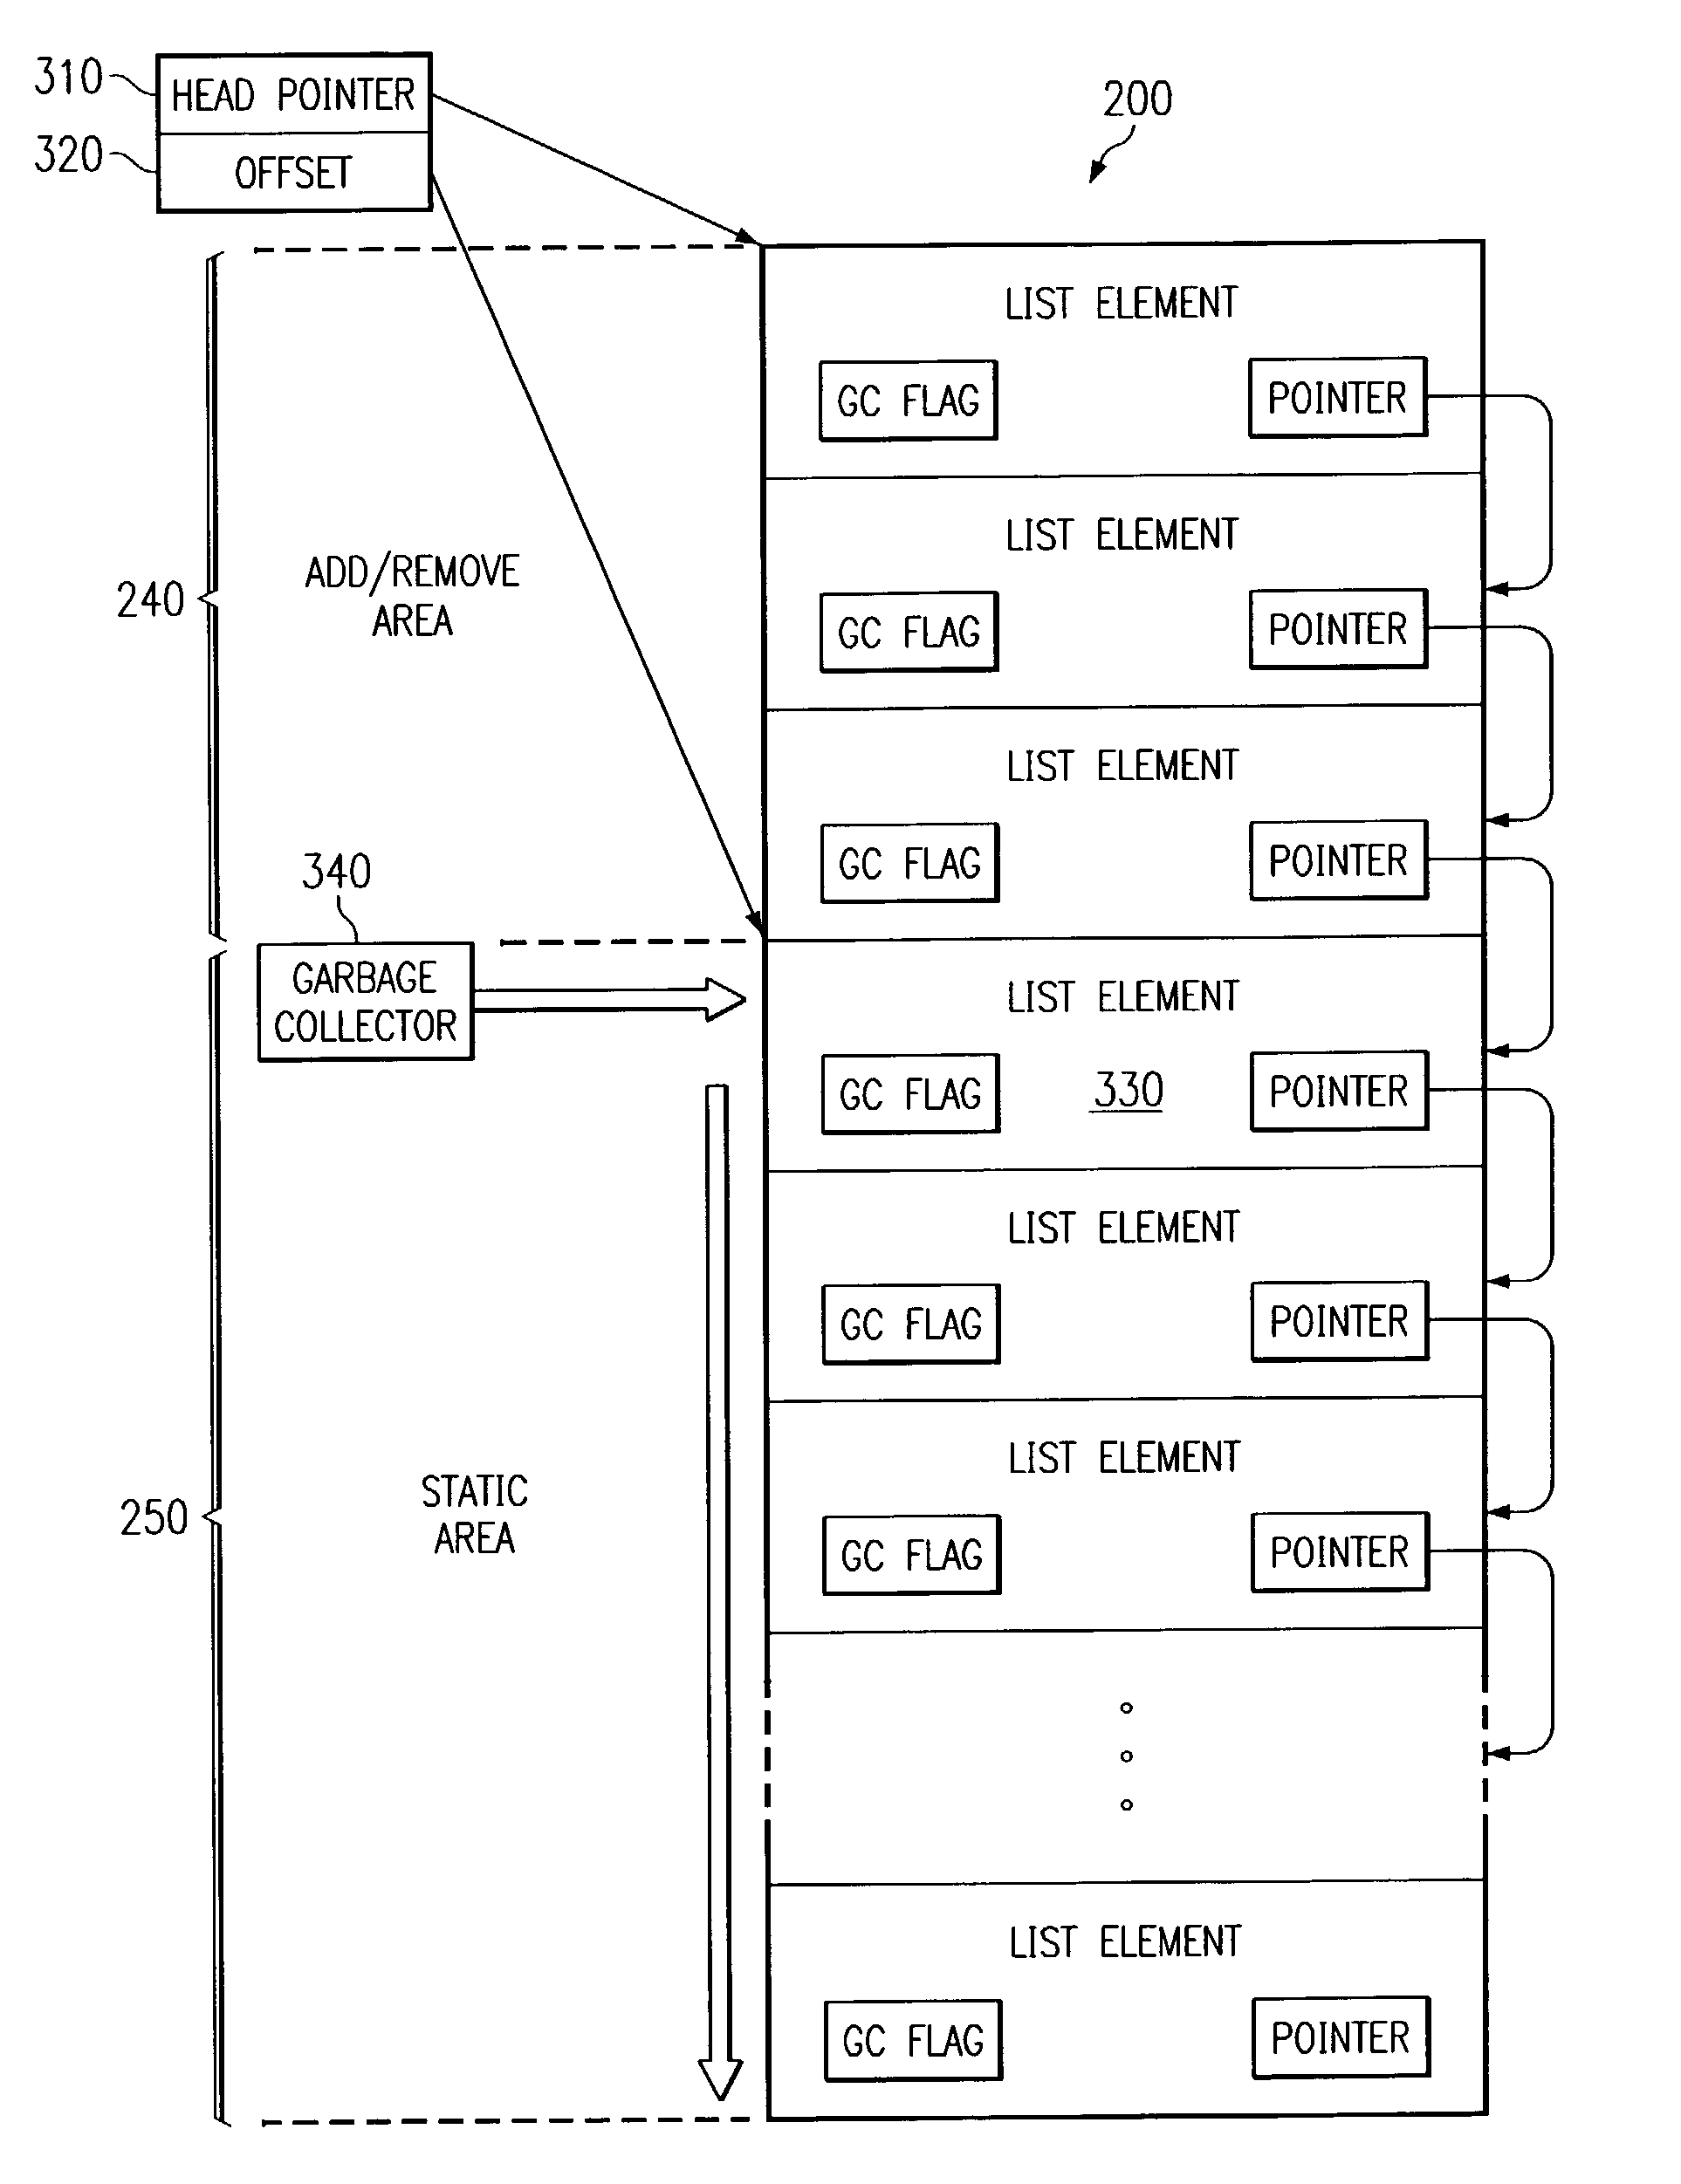 Apparatus and method for removing elements from a linked list